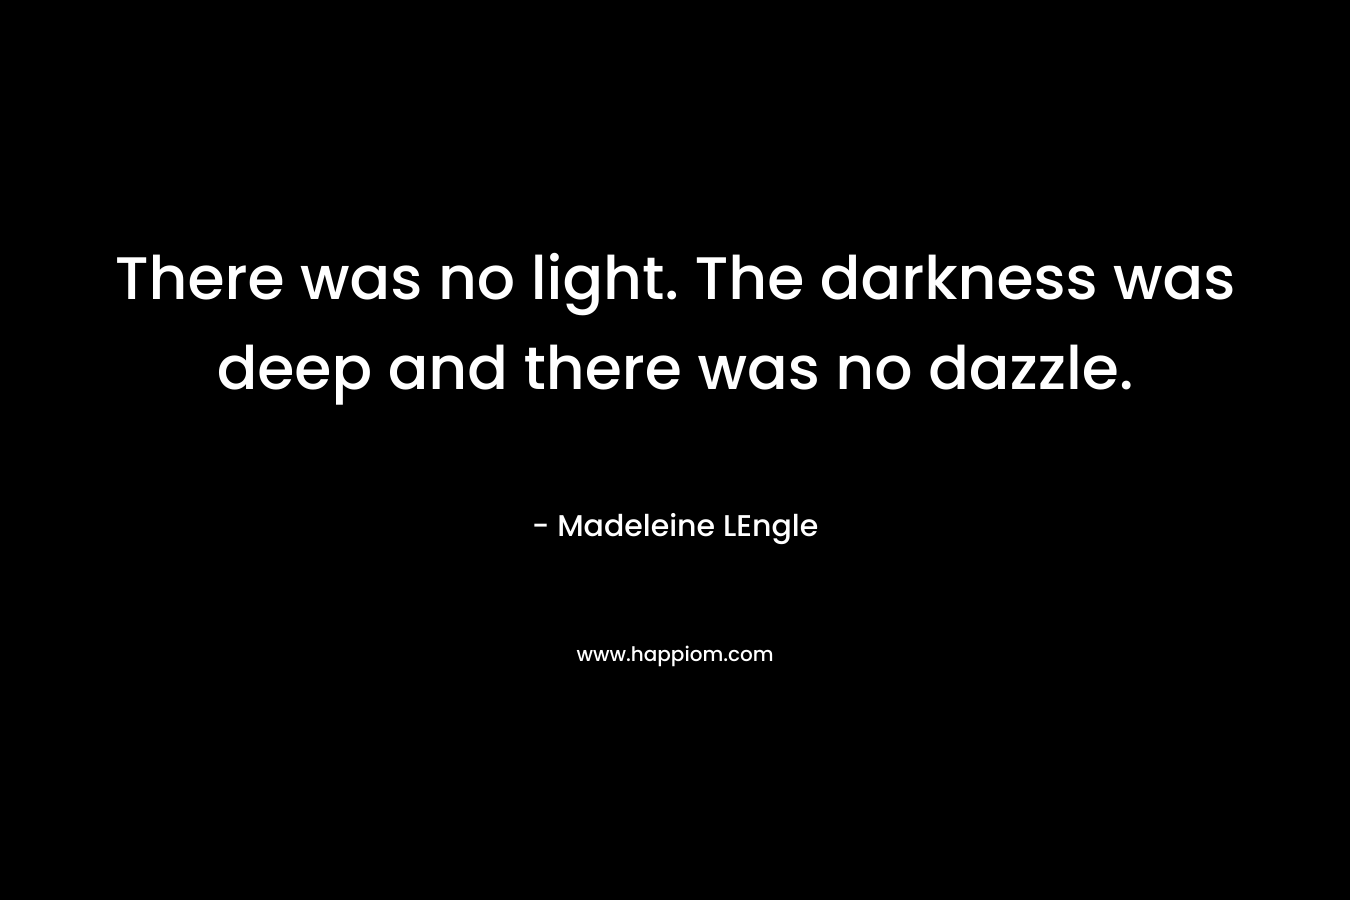 There was no light. The darkness was deep and there was no dazzle. – Madeleine LEngle